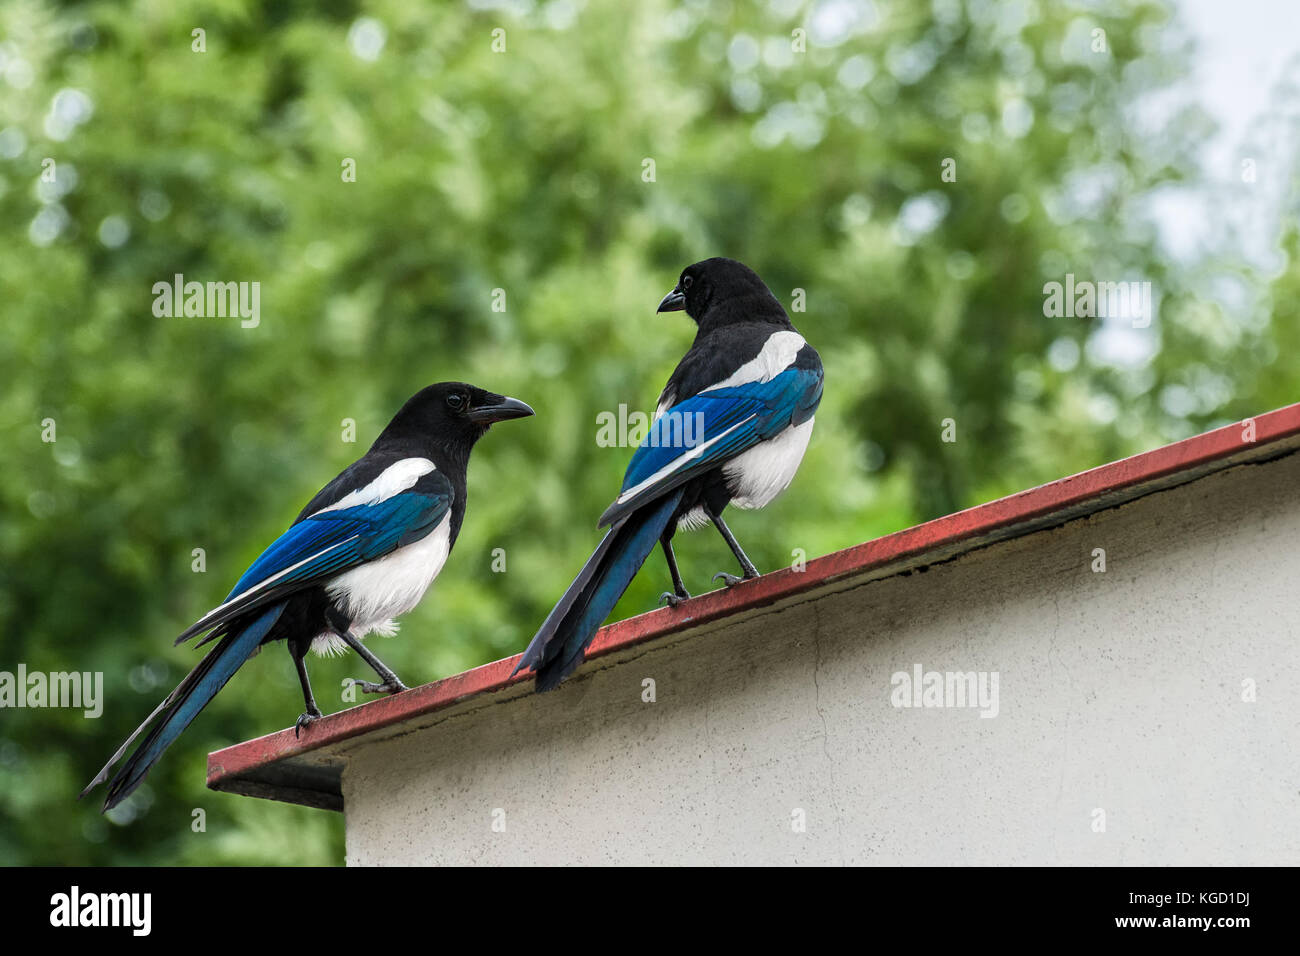 Two conspirators on the roof. Eurasian magpie. Pica pica. Romantic meeting of a beautiful bird pair. Common magpie. Stock Photo